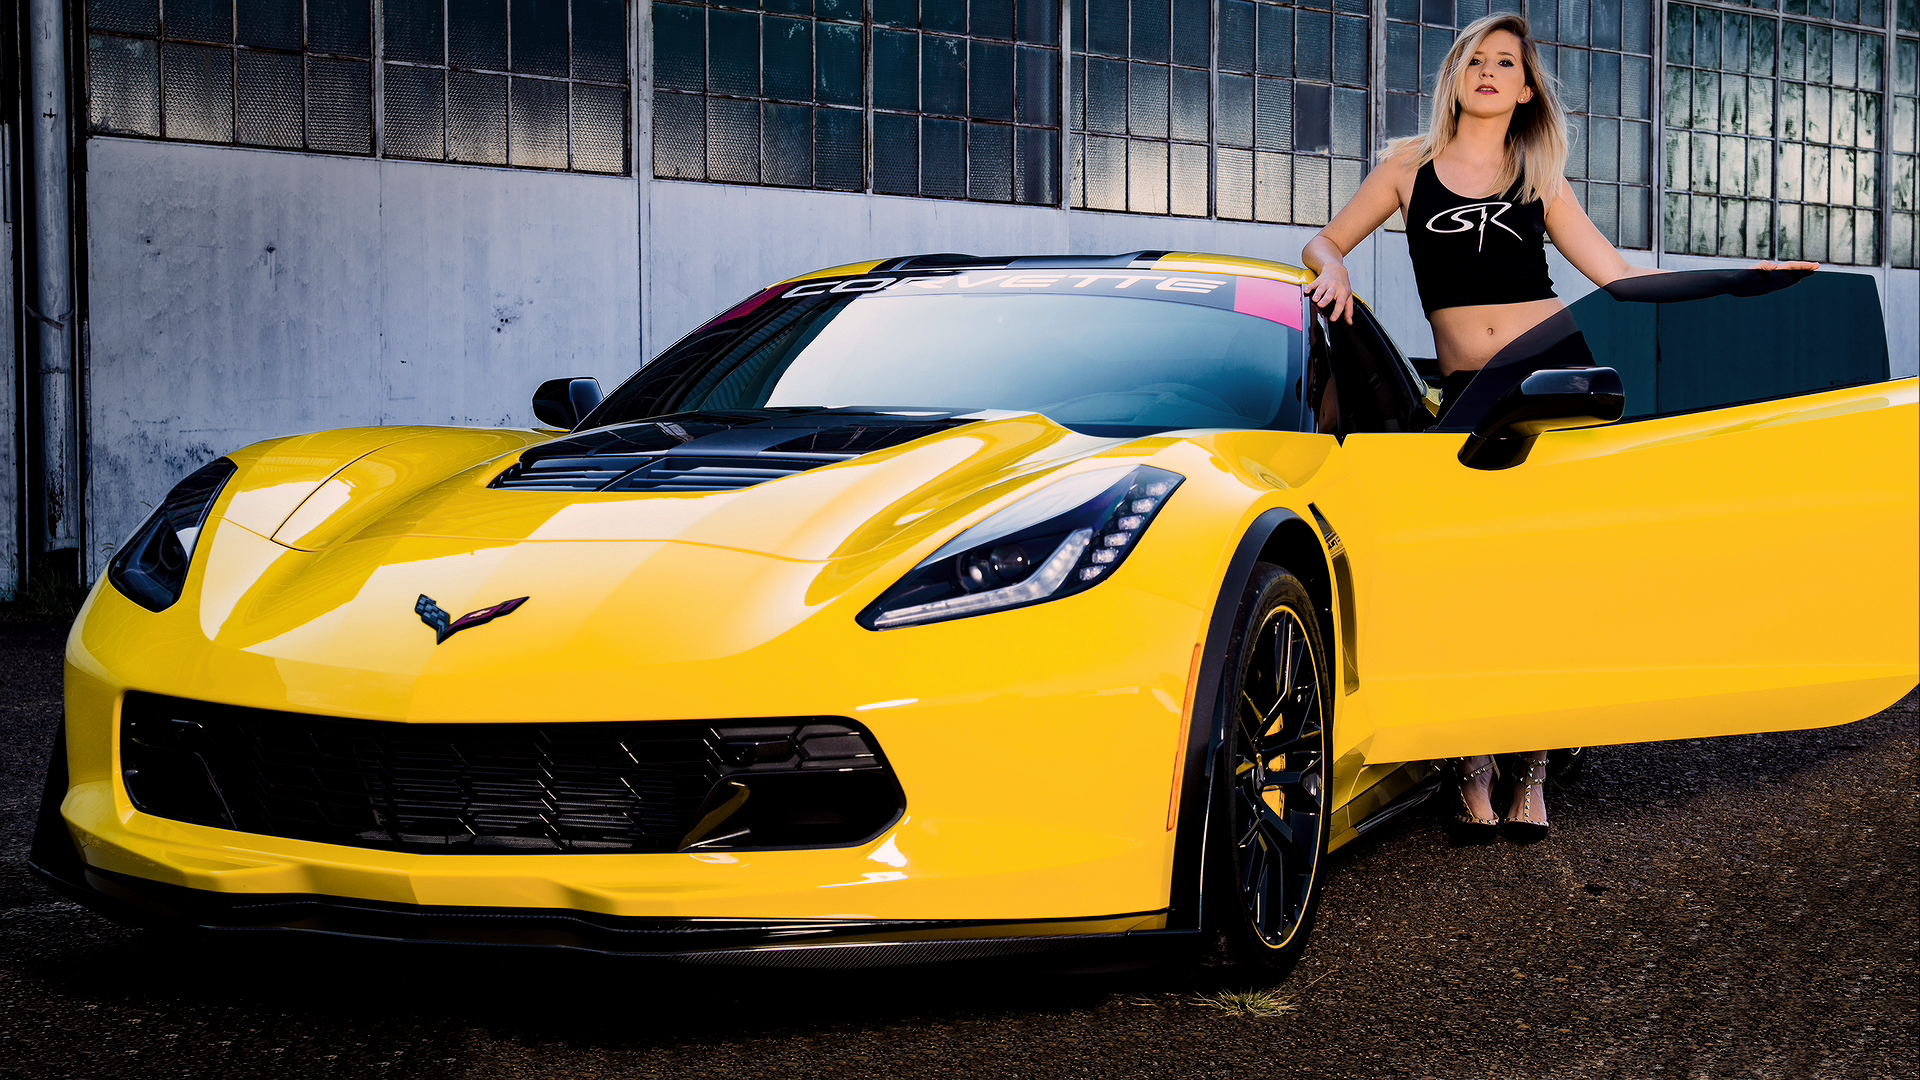 People 1920x1080 Chevrolet Corvette C7 car vehicle women yellow cars women with cars standing blonde model bare midriff belly dyed hair Corvette looking at viewer Chevrolet American cars